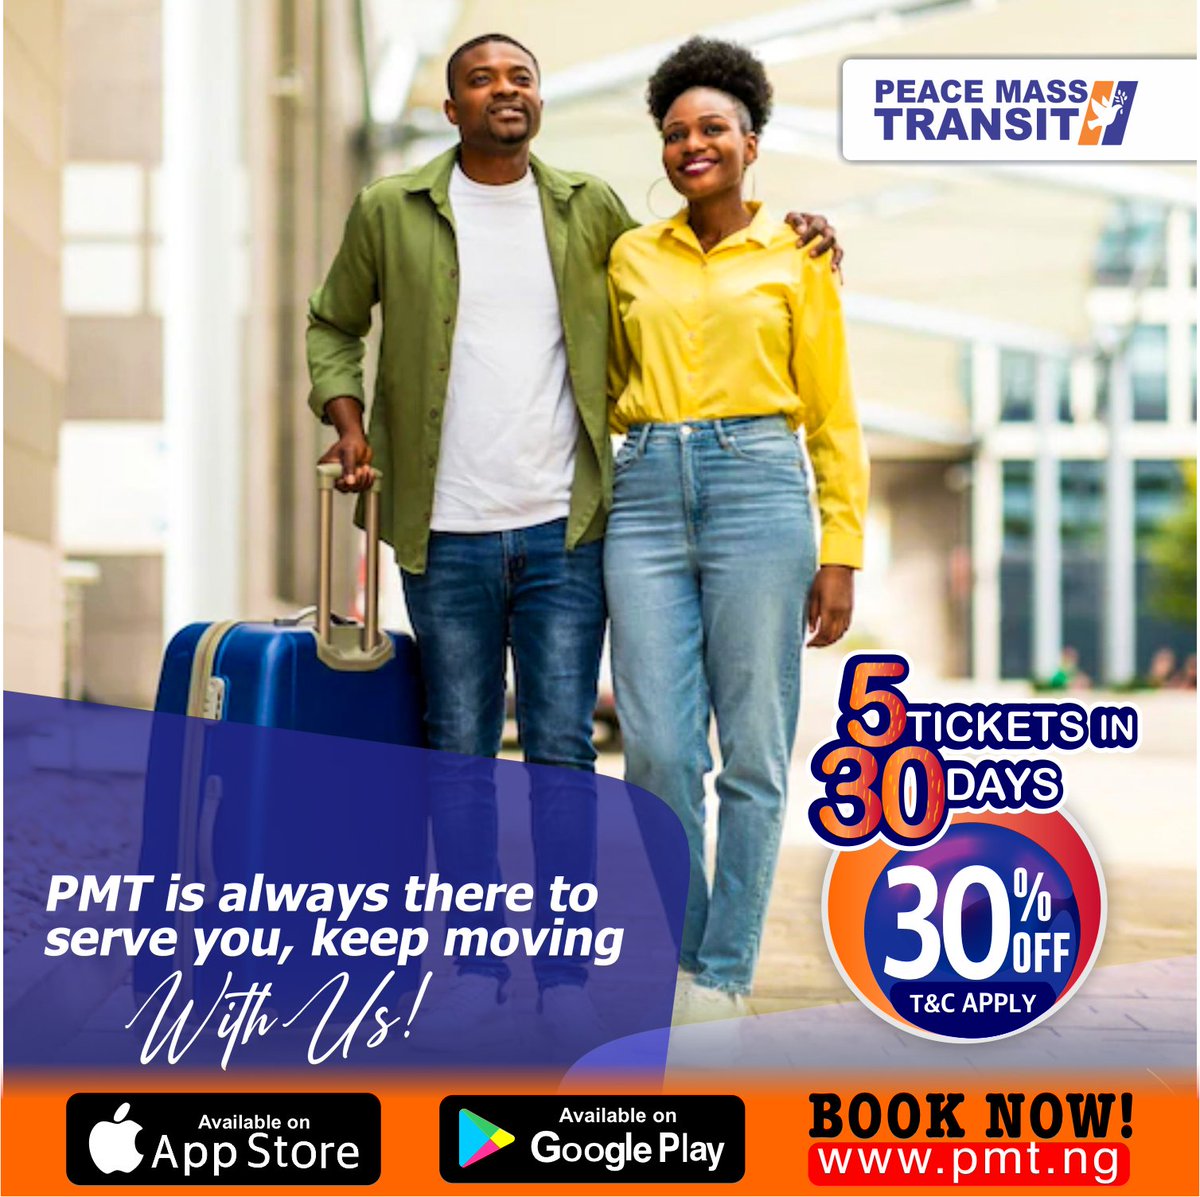 PMT is always there to serve you, keep moving with us!

Book now @ pmt.ng

Download our mobile App play.google.com/store/apps/det…

#Transportation 
#wednesdaythought 
#WednesdayMotivation 
#bookatrip
#peacemasstransit